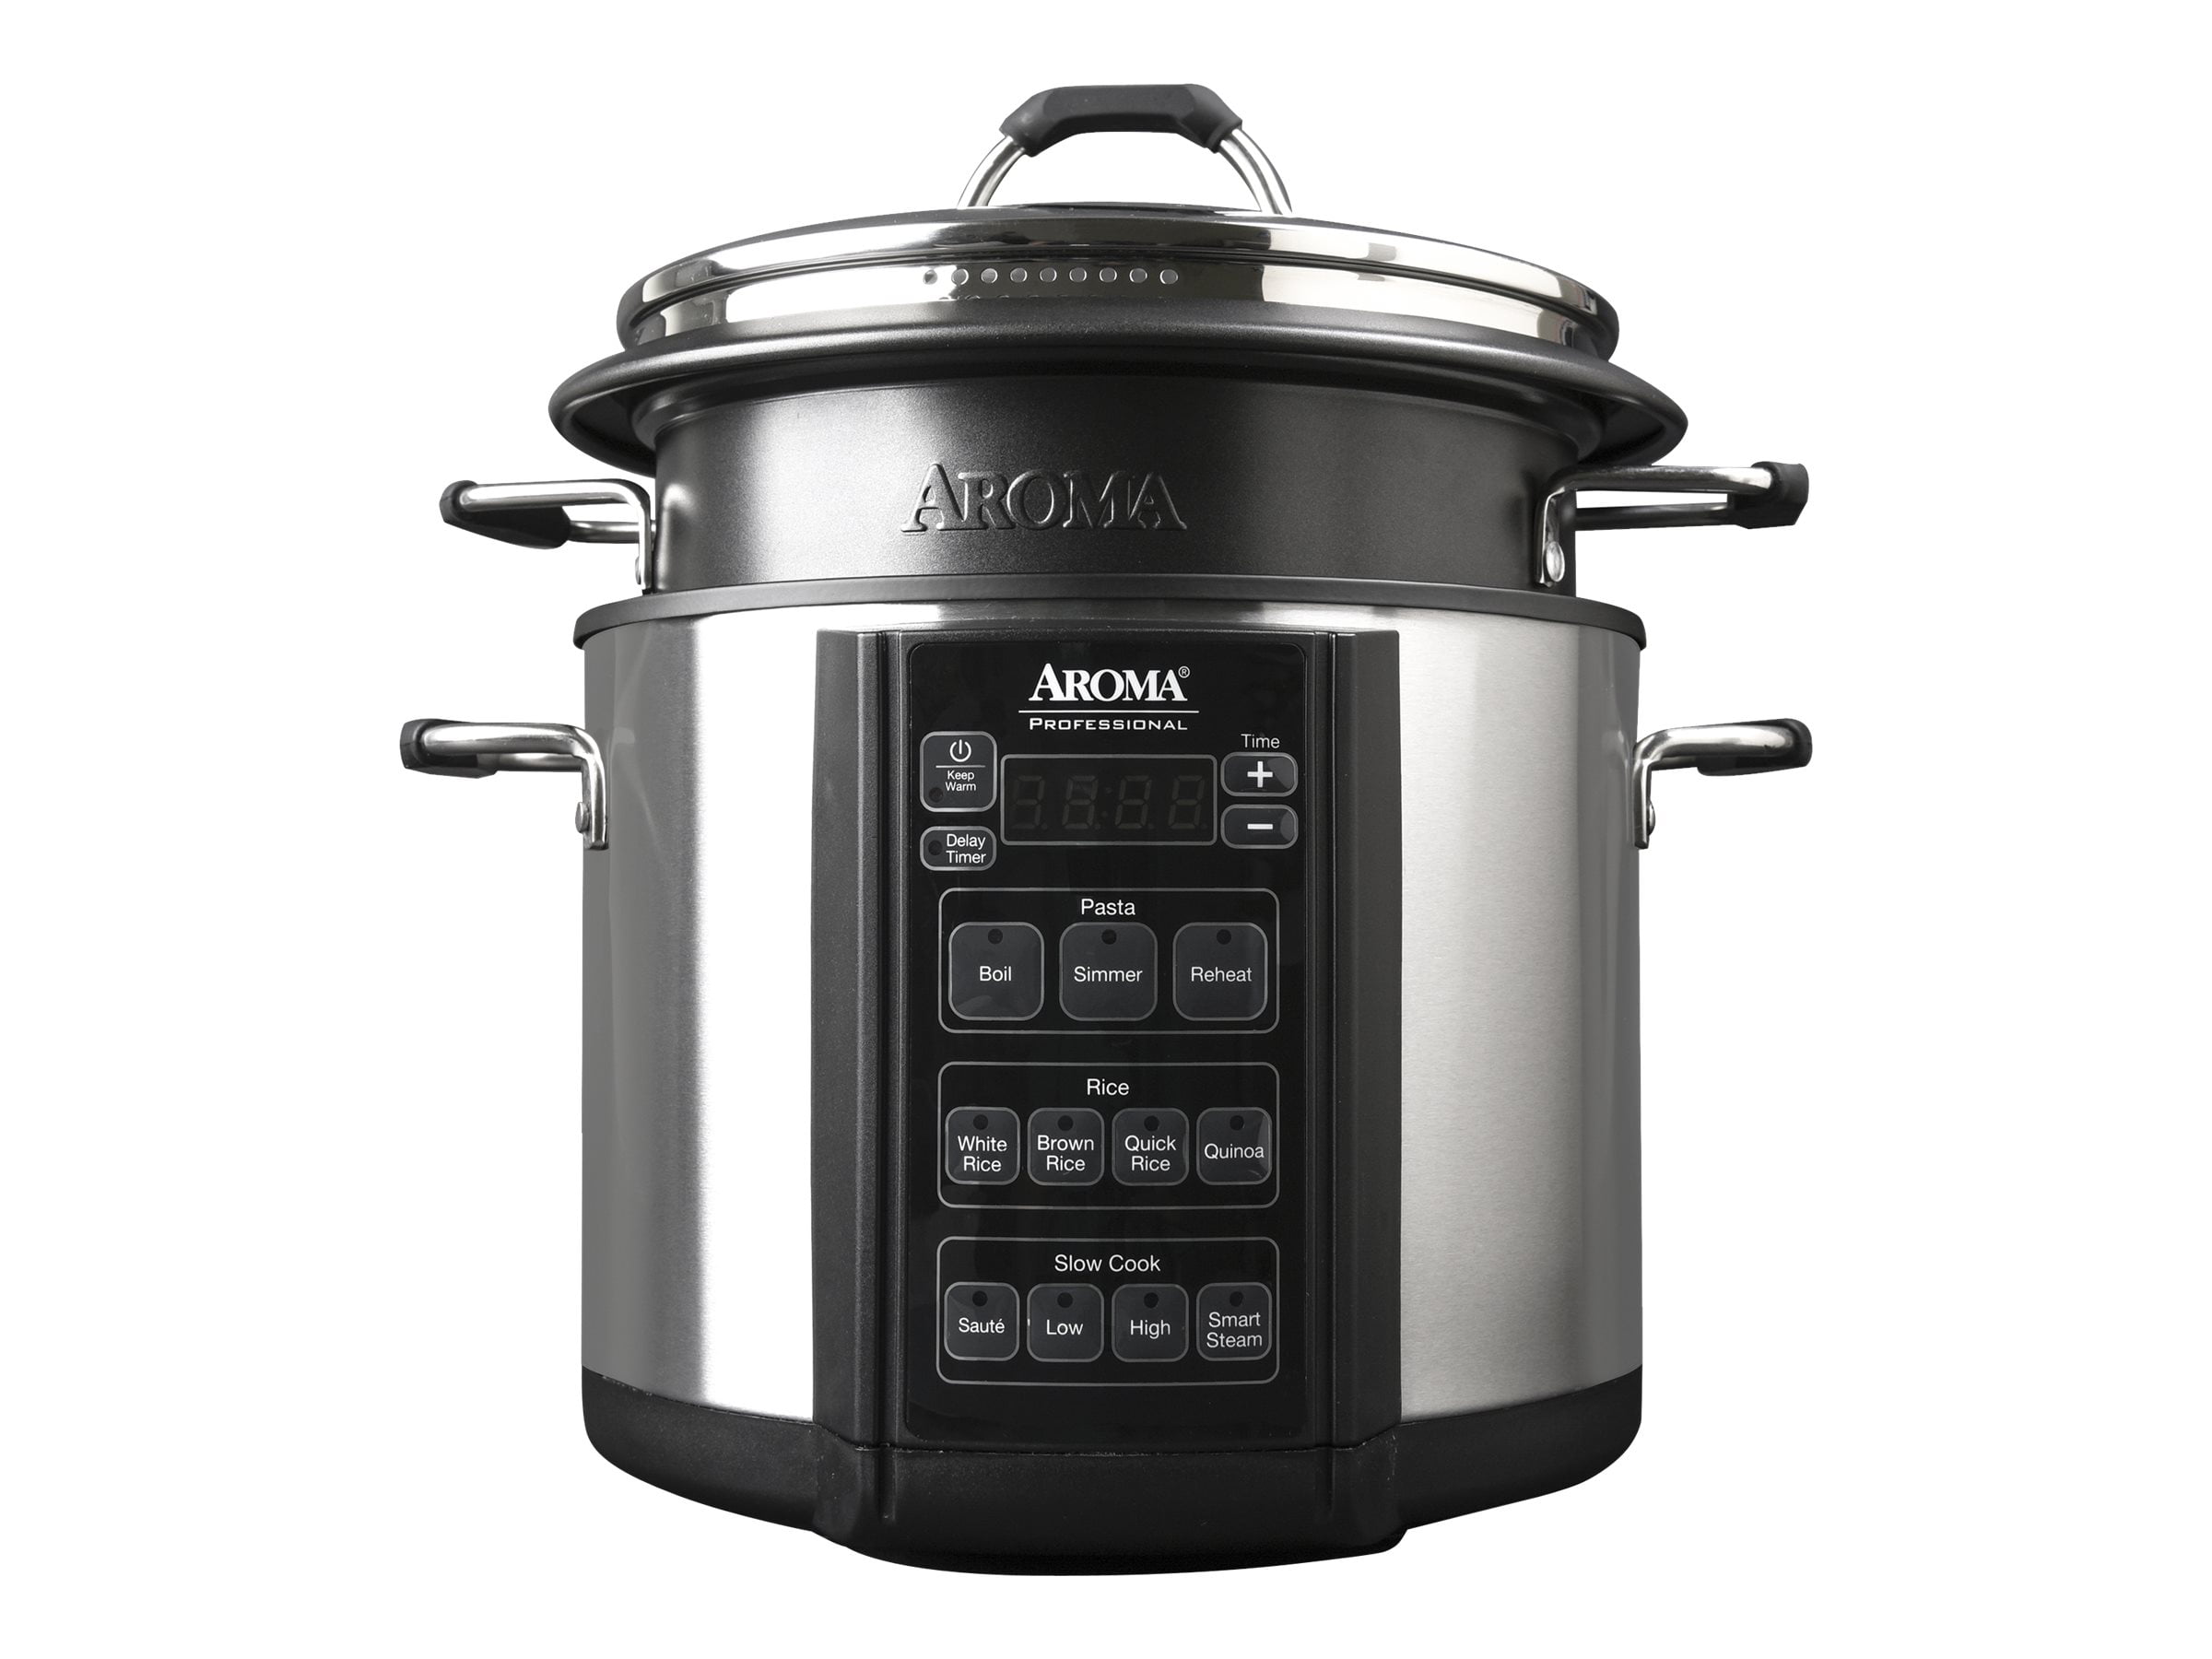 CozyHom 2.5QT Dual Pot Electric Slow Cooker, Stainless Steel Buffet Server  Food Warmer Slow Cooker With Adjustable Temp Removable Lid Rests, Black